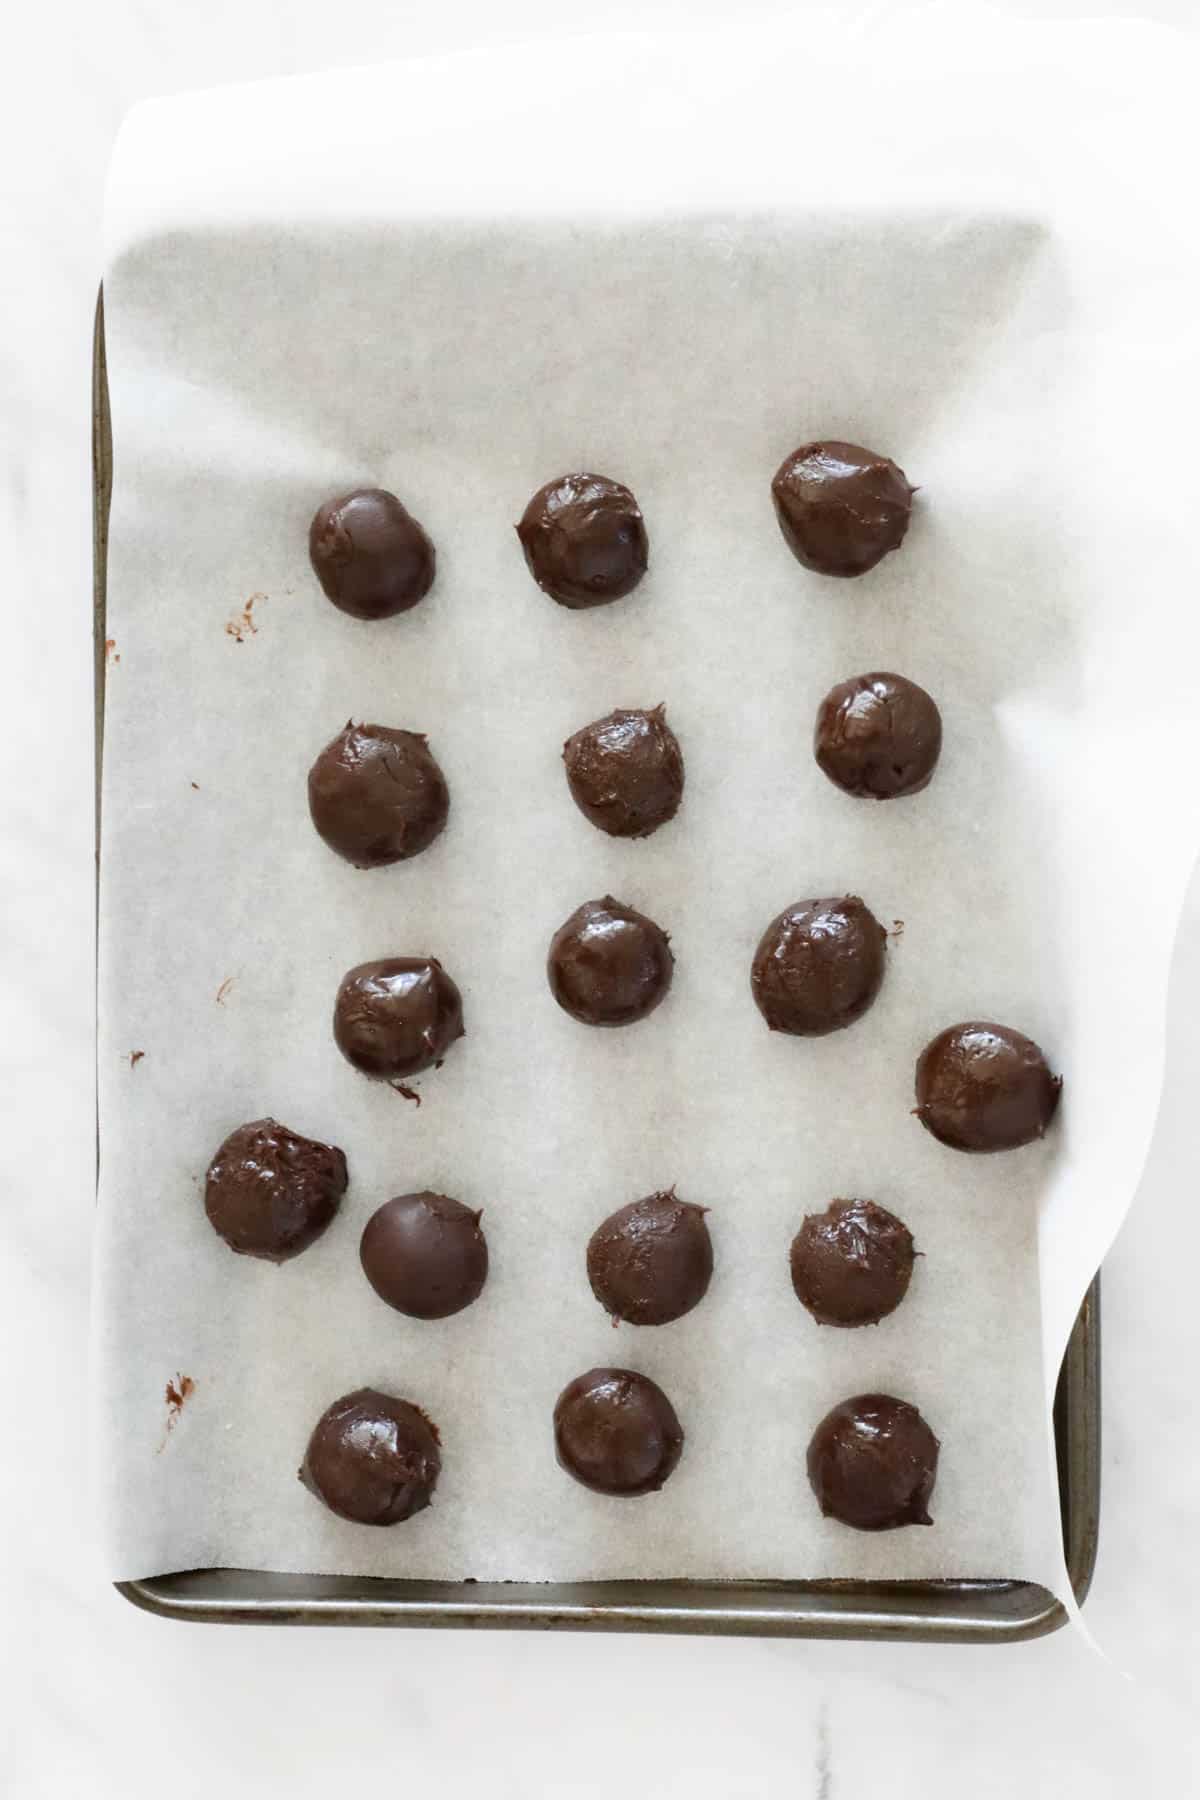 Teaspoons of the chocolate ganache rolled into balls and placed on baking paper.